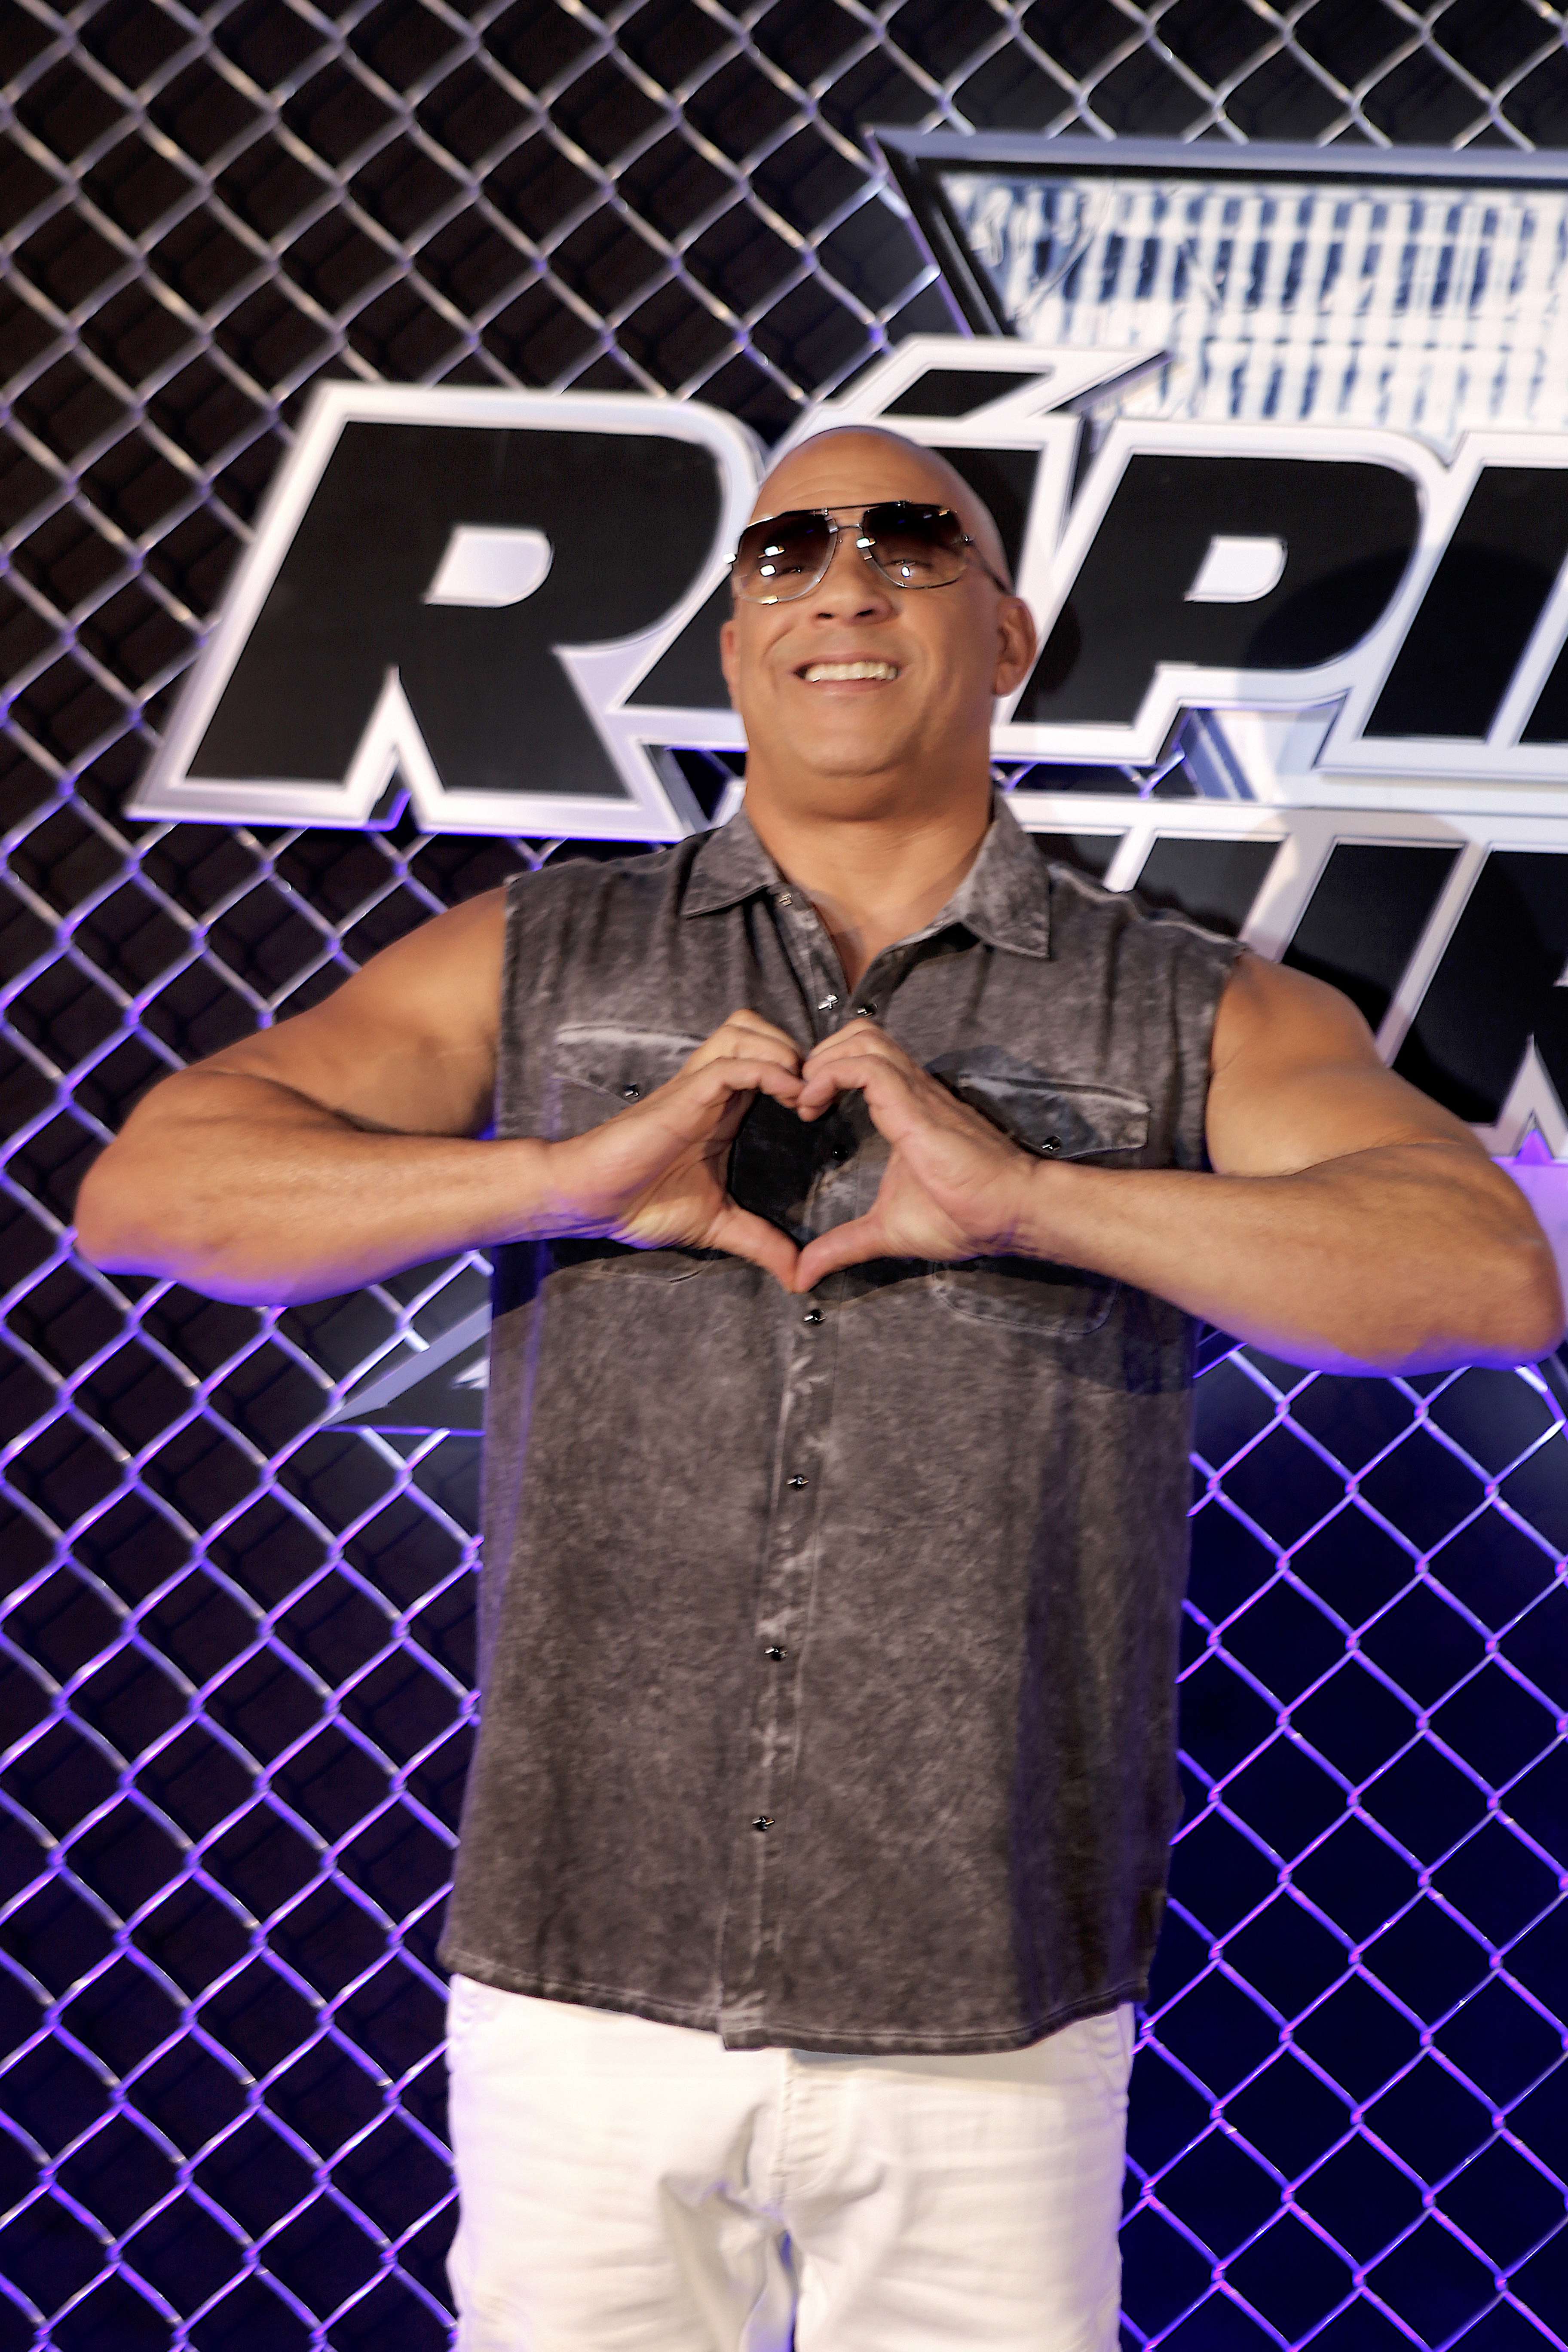 Vin Diesel stands in front of a backdrop, wearing sunglasses, a sleeveless denim shirt, and white pants, making a heart shape with his hands